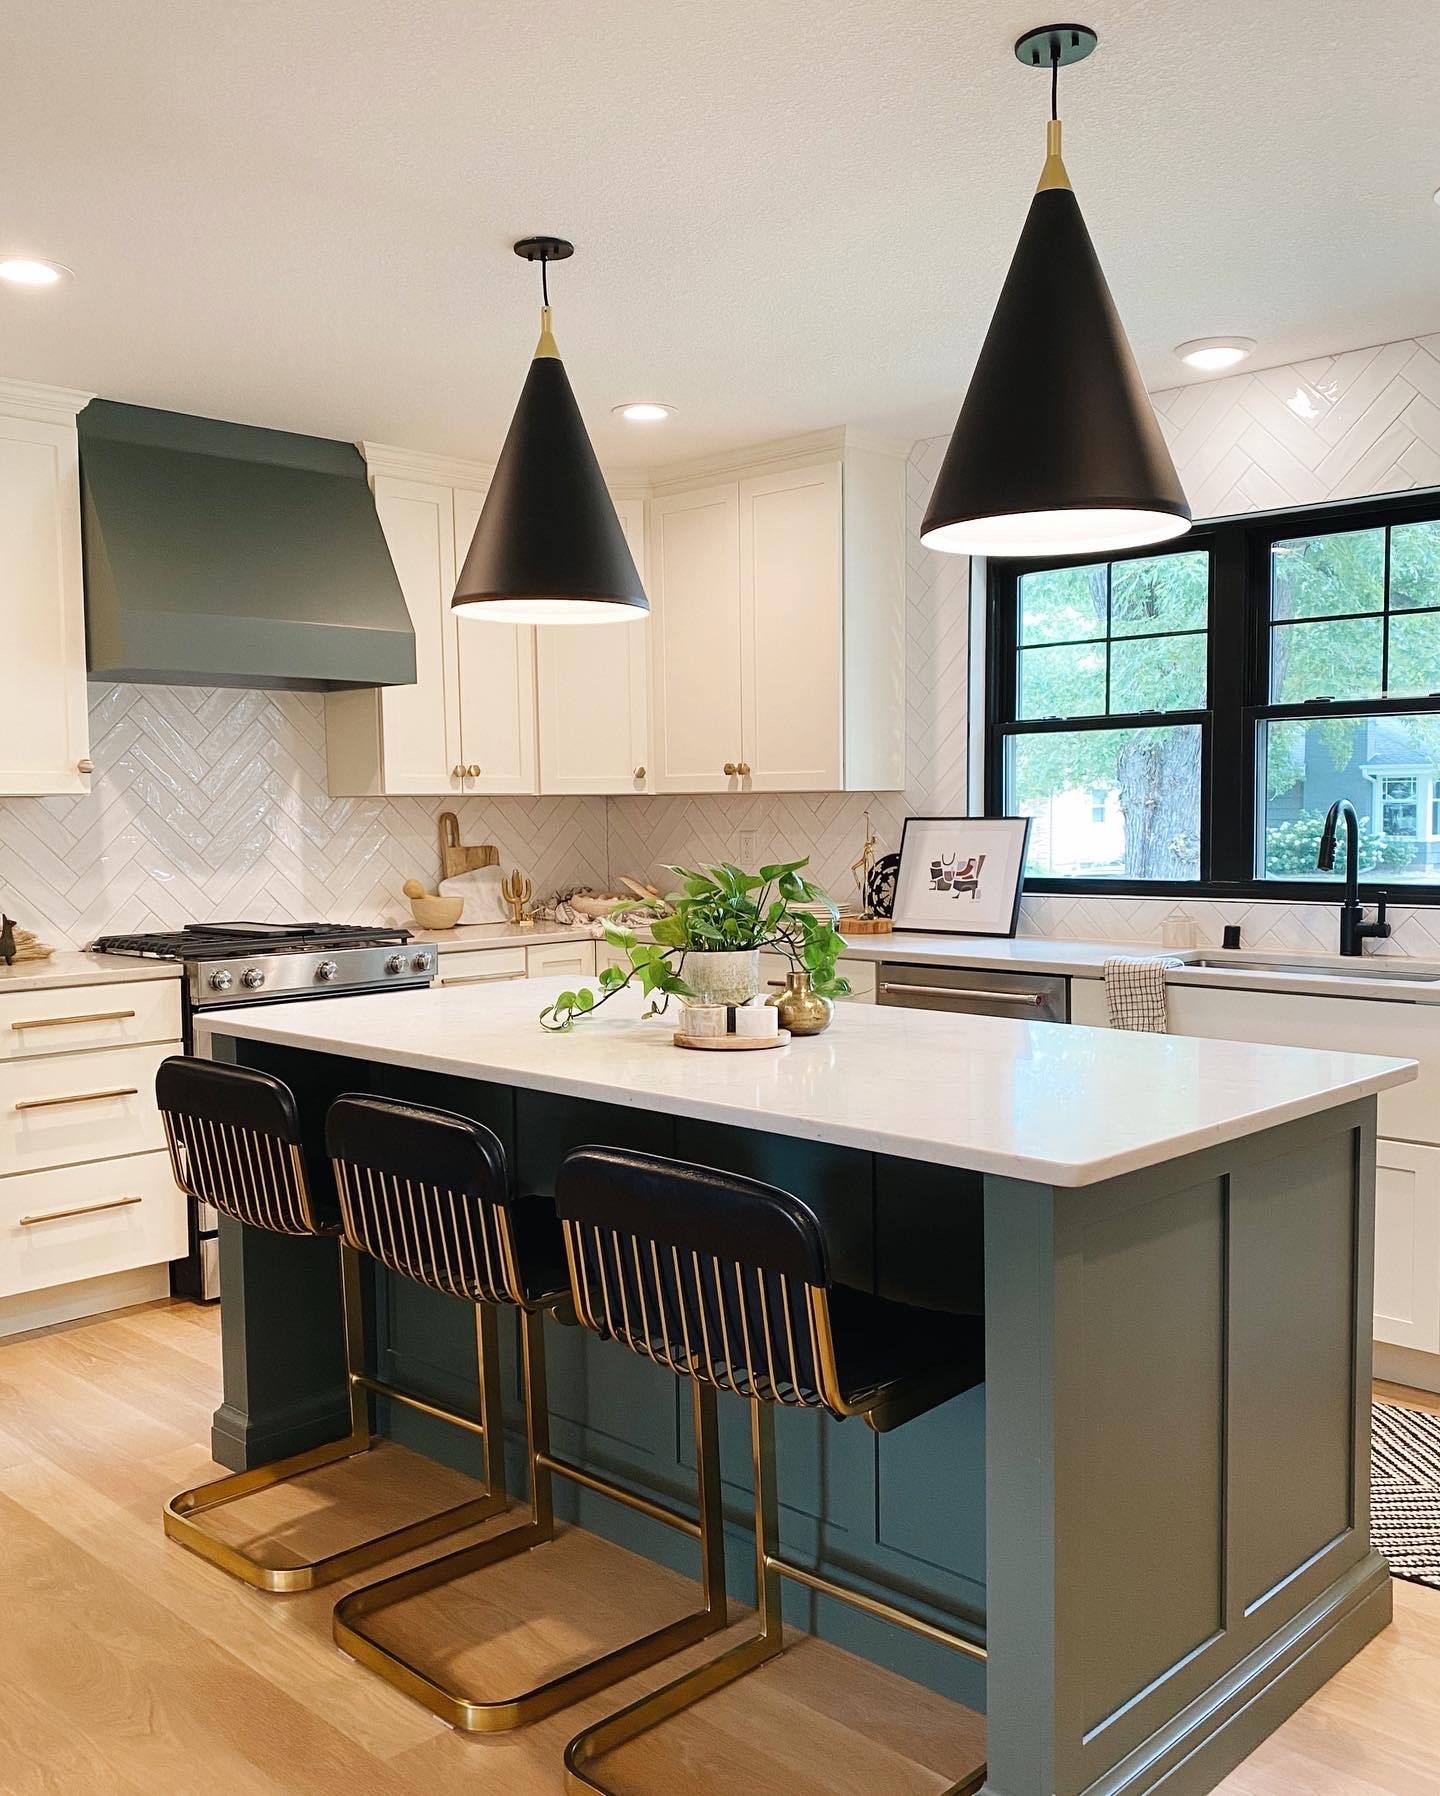 Kitchen Design with Green Cabinetry and Kitchen Island